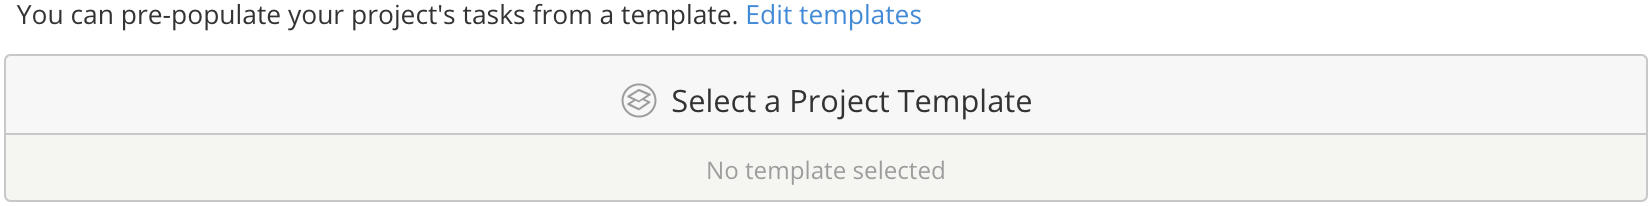 Select_a_Project_Template.png